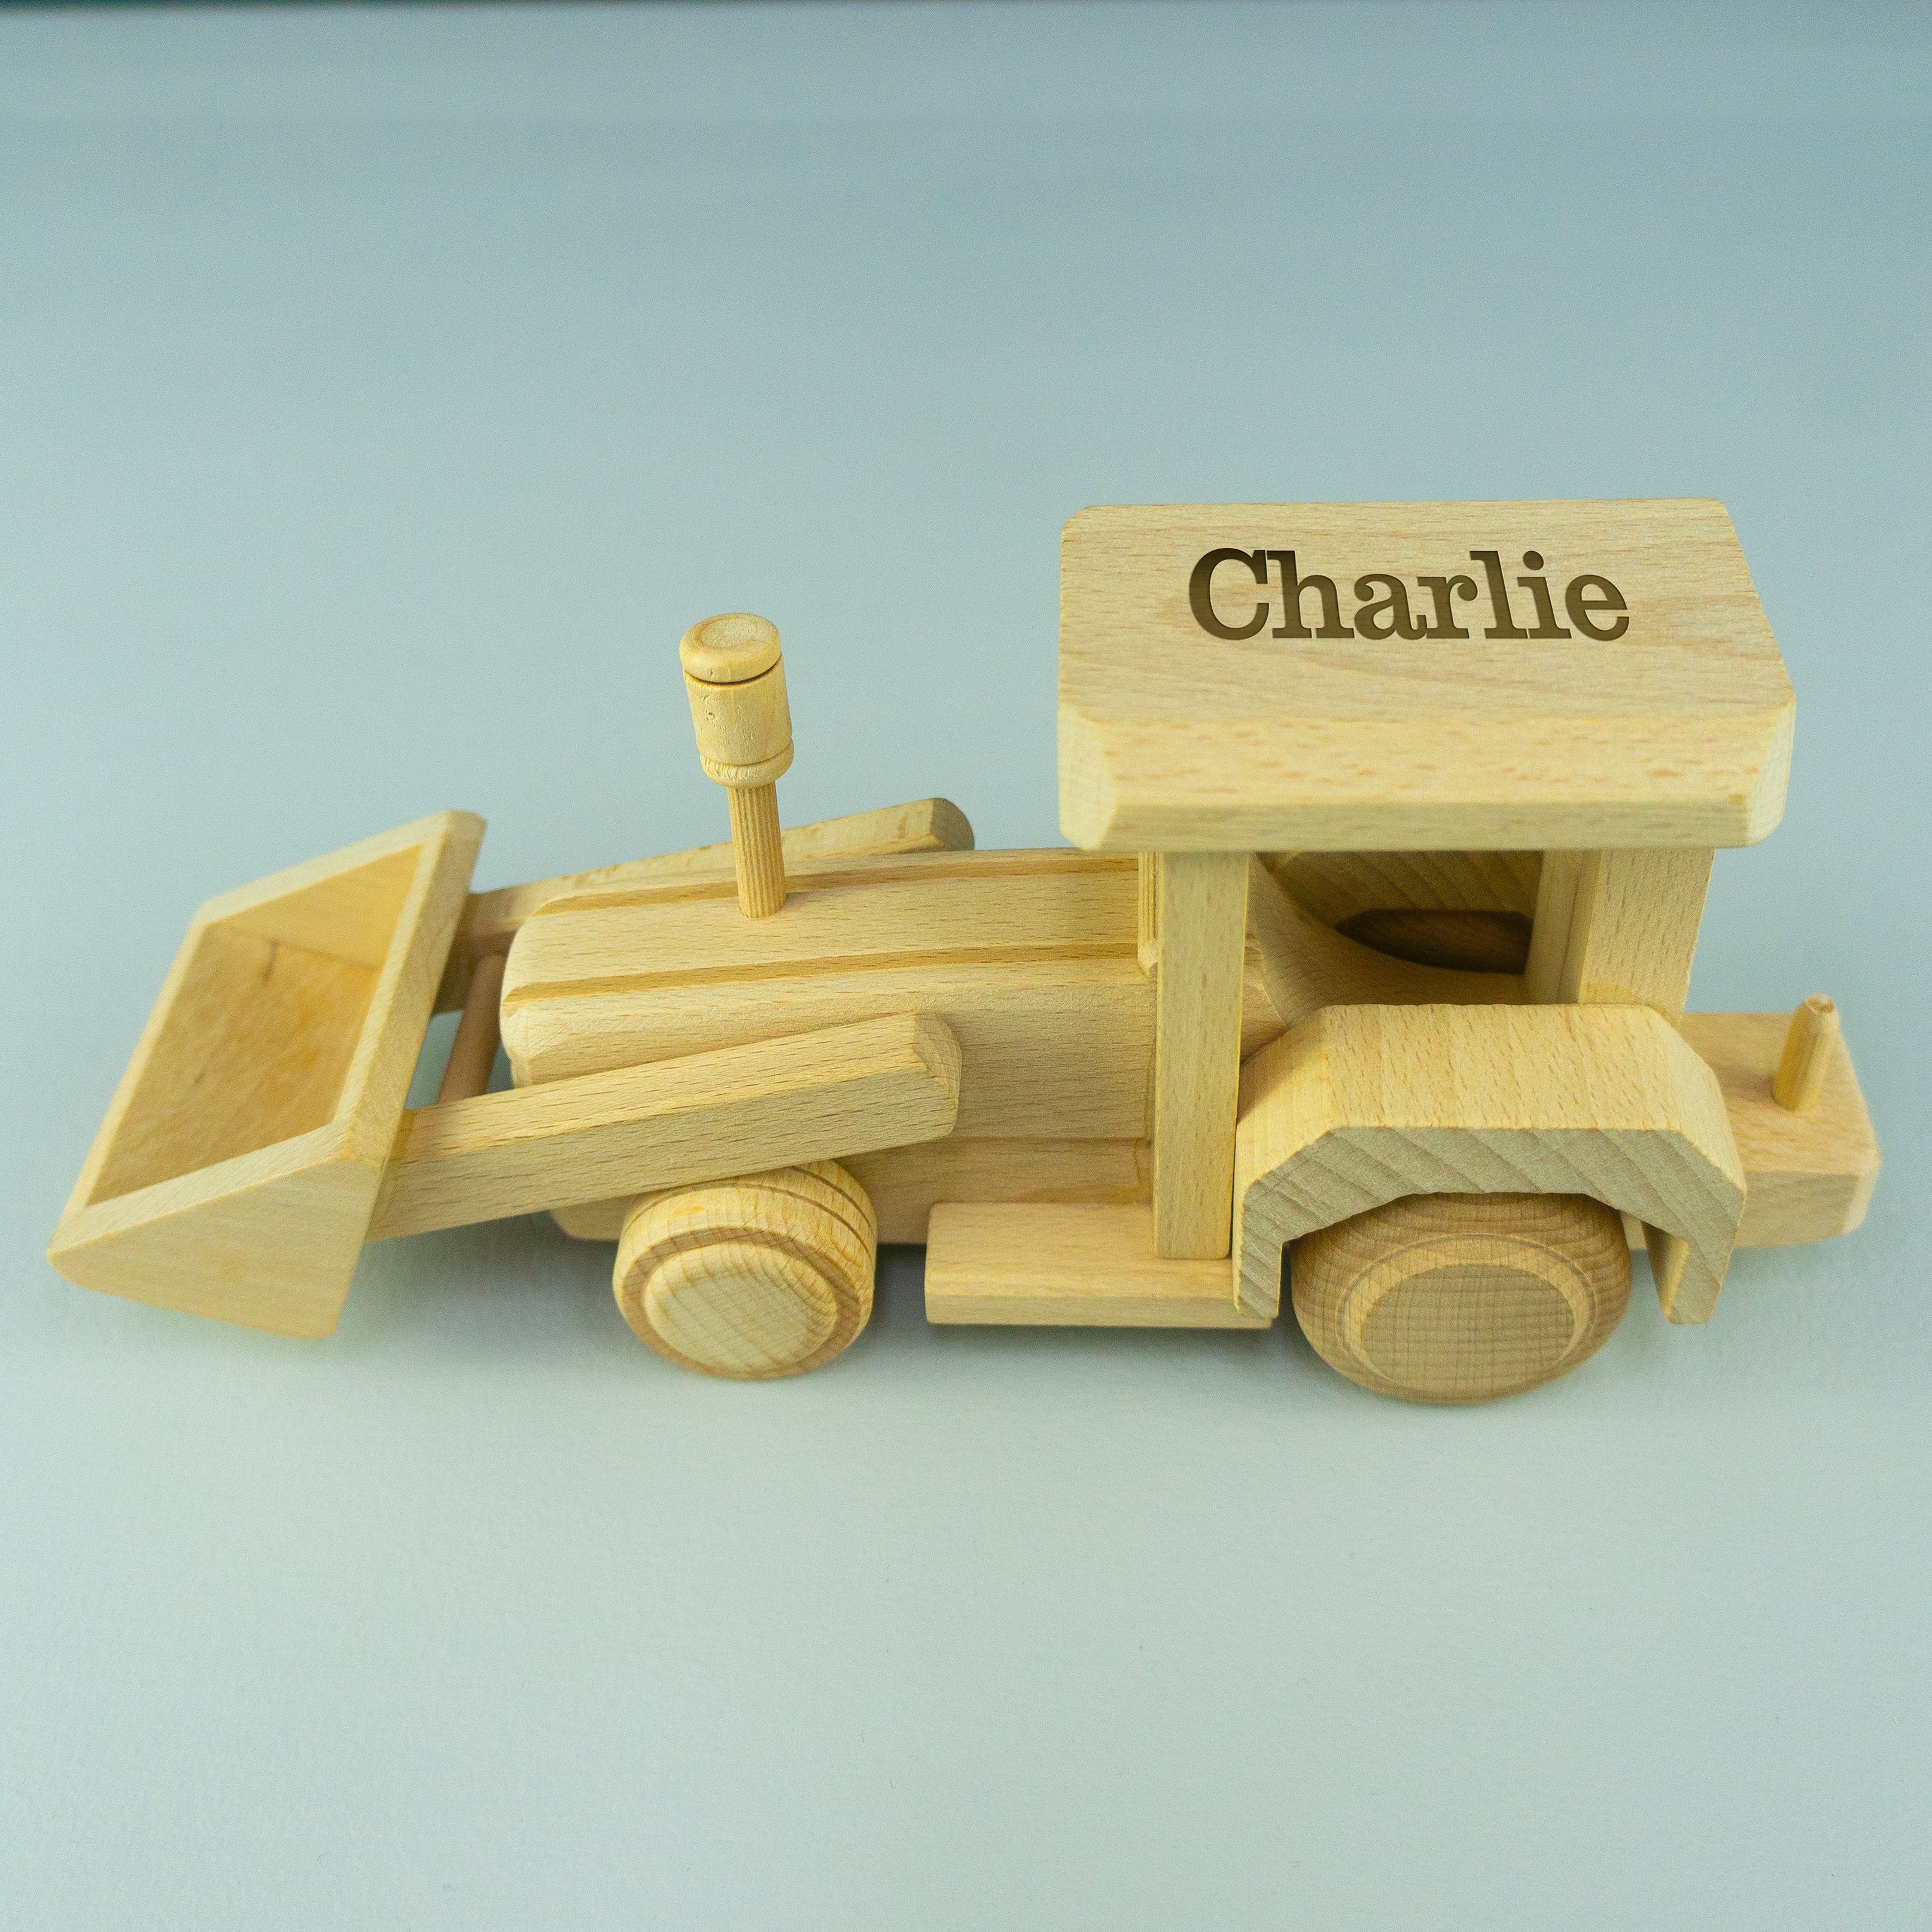 Personalised wooden toy digger truck excavator